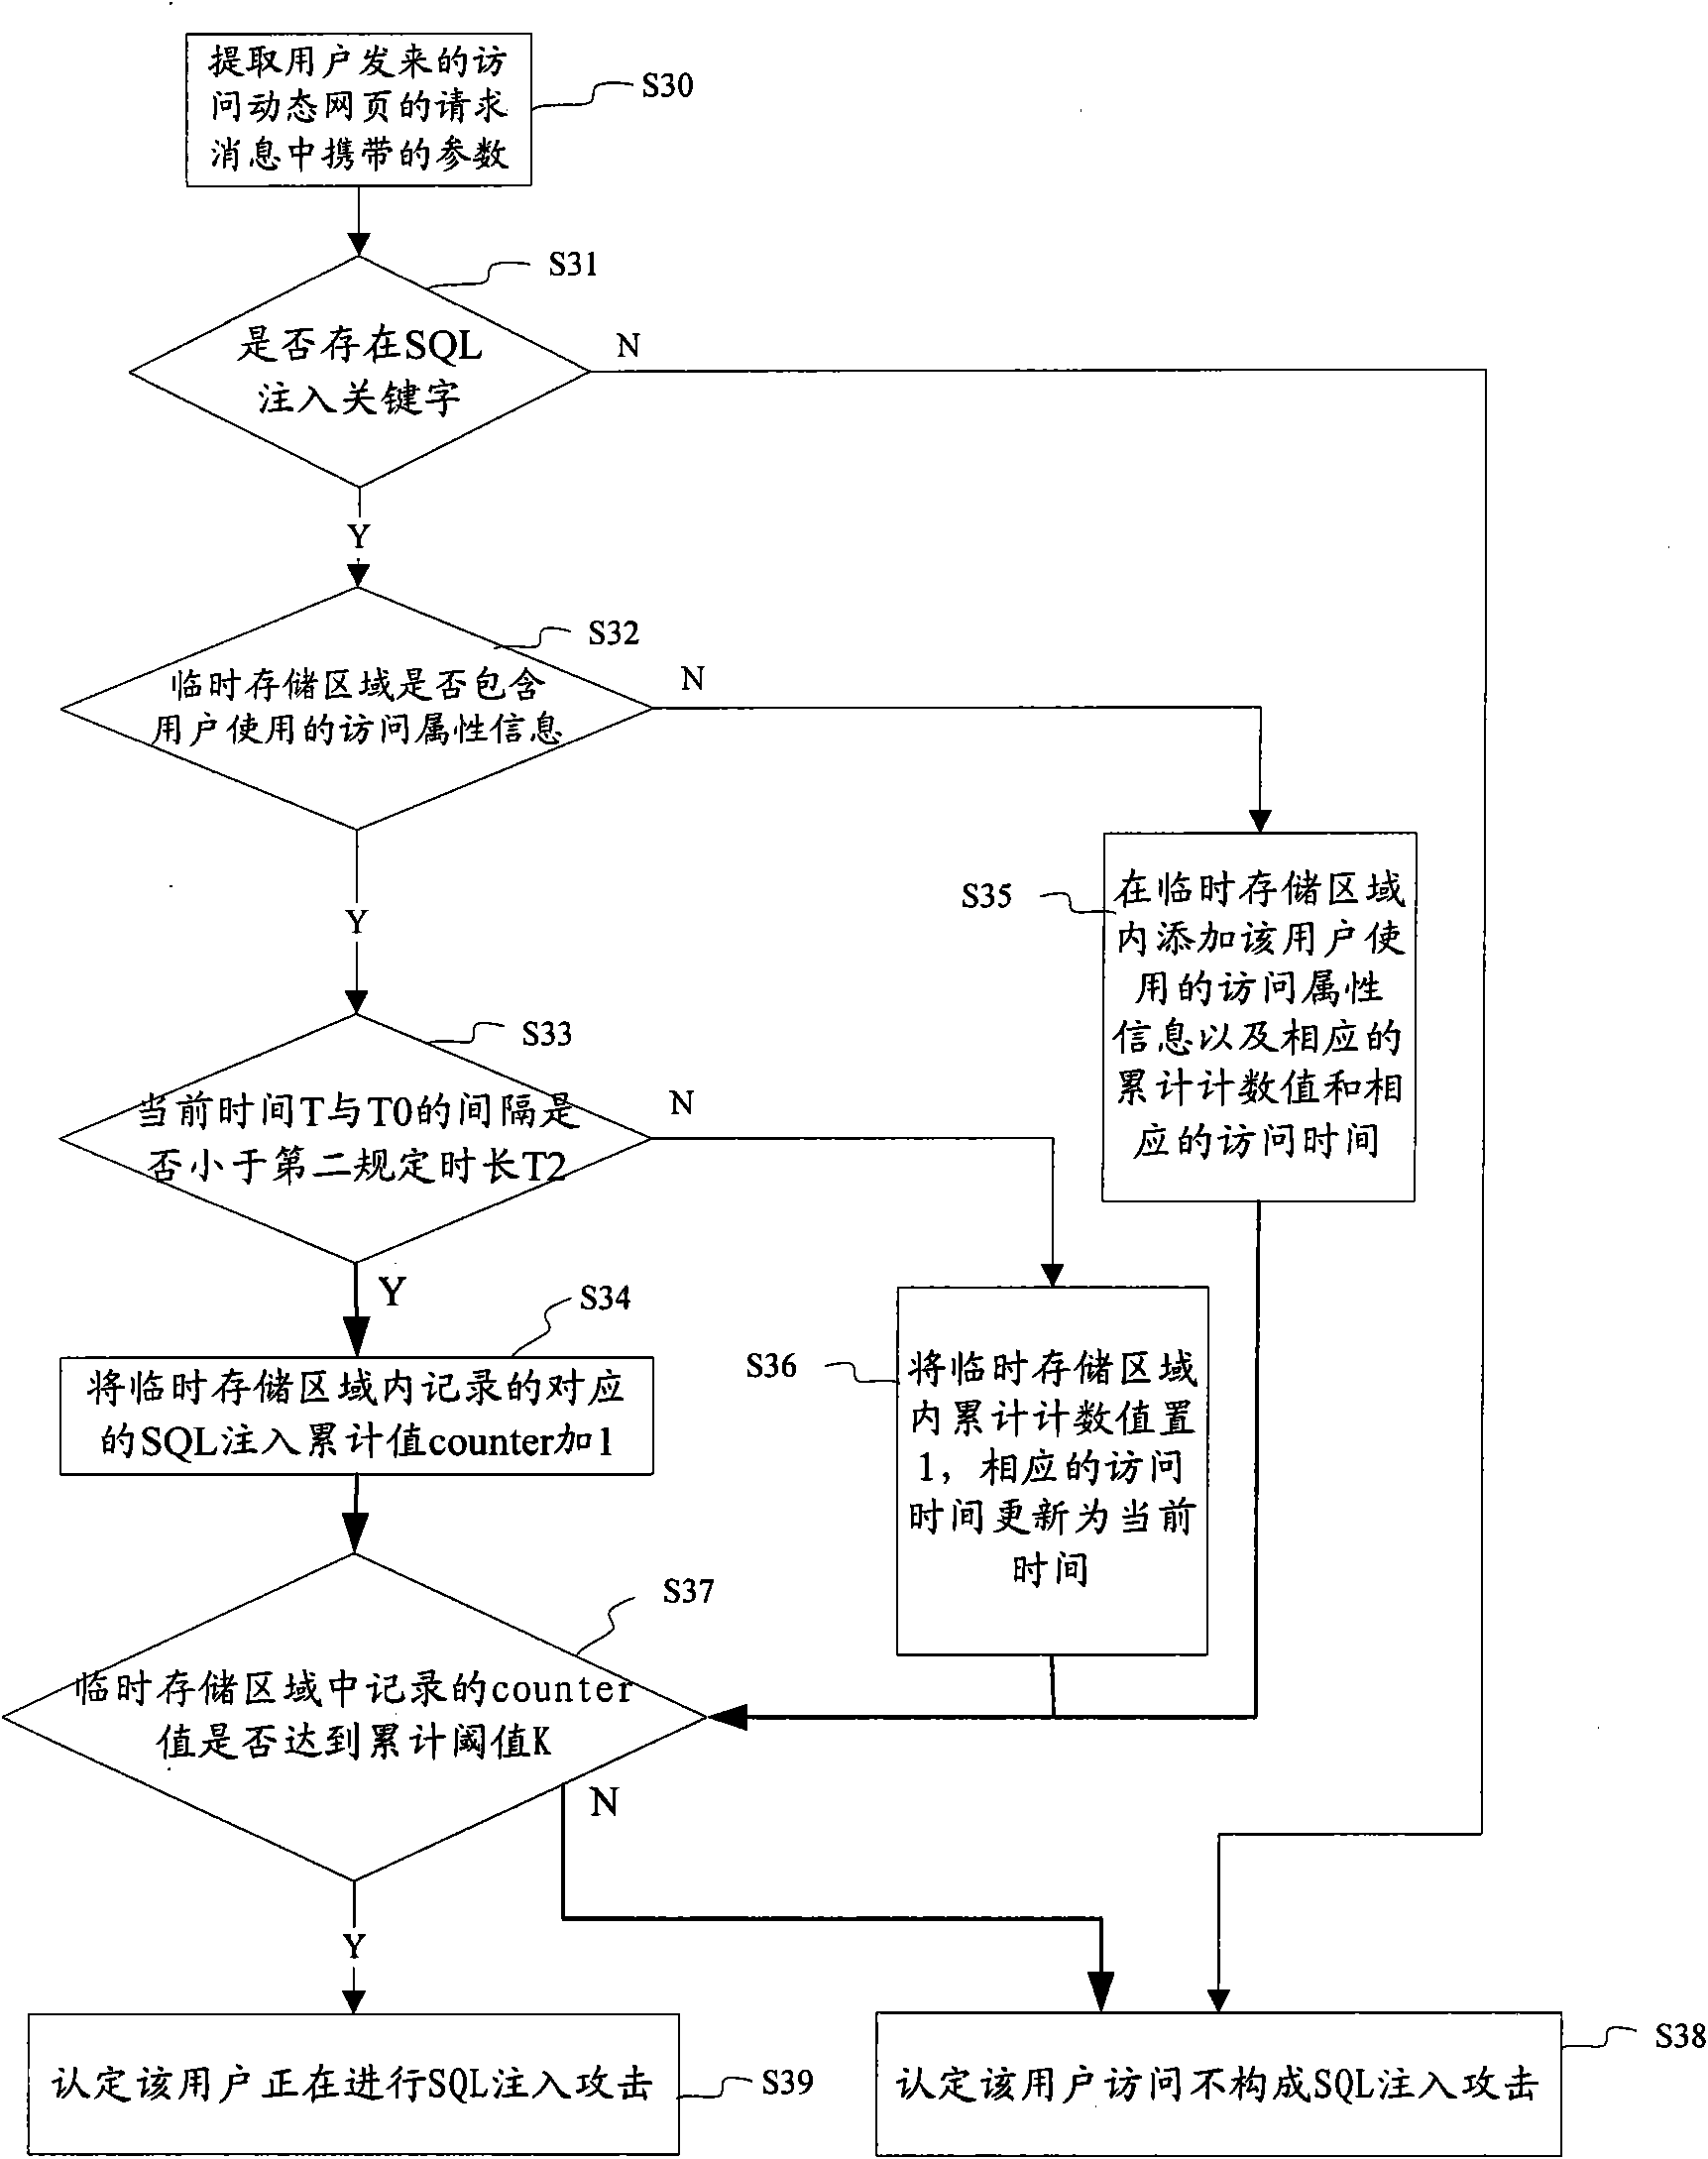 Method and device for detecting SQL (Structured Query Language) injection attack